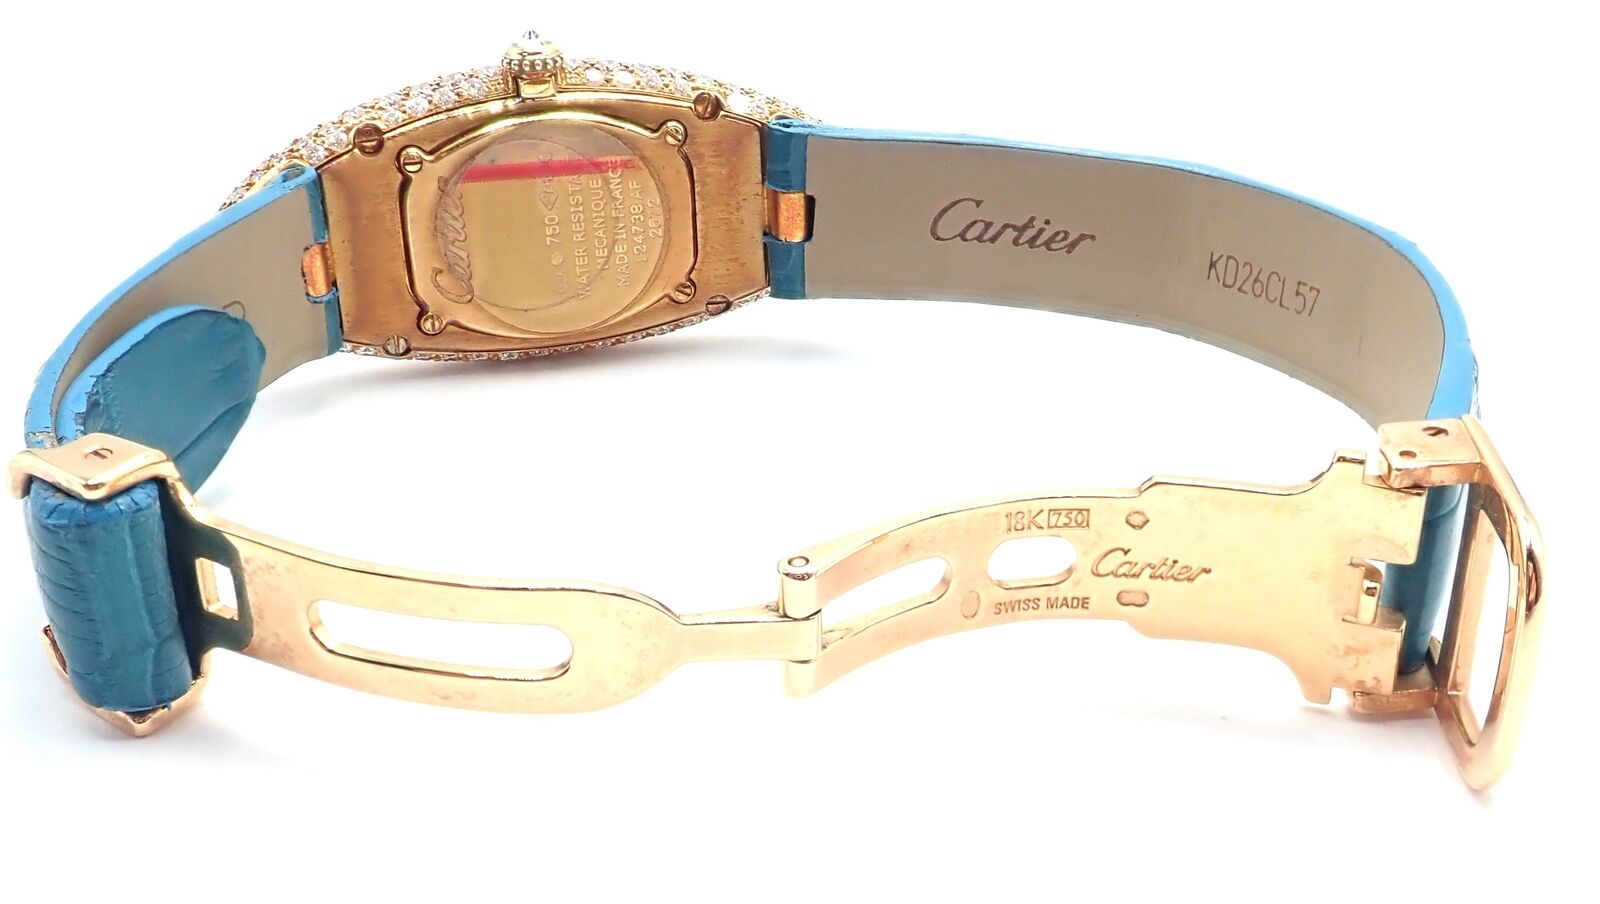 Cartier Jewelry & Watches:Watches, Parts & Accessories:Watches:Wristwatches Authentic! Cartier Baignoire Allongée 18k Gold Diamond Mechanical Watch 2672